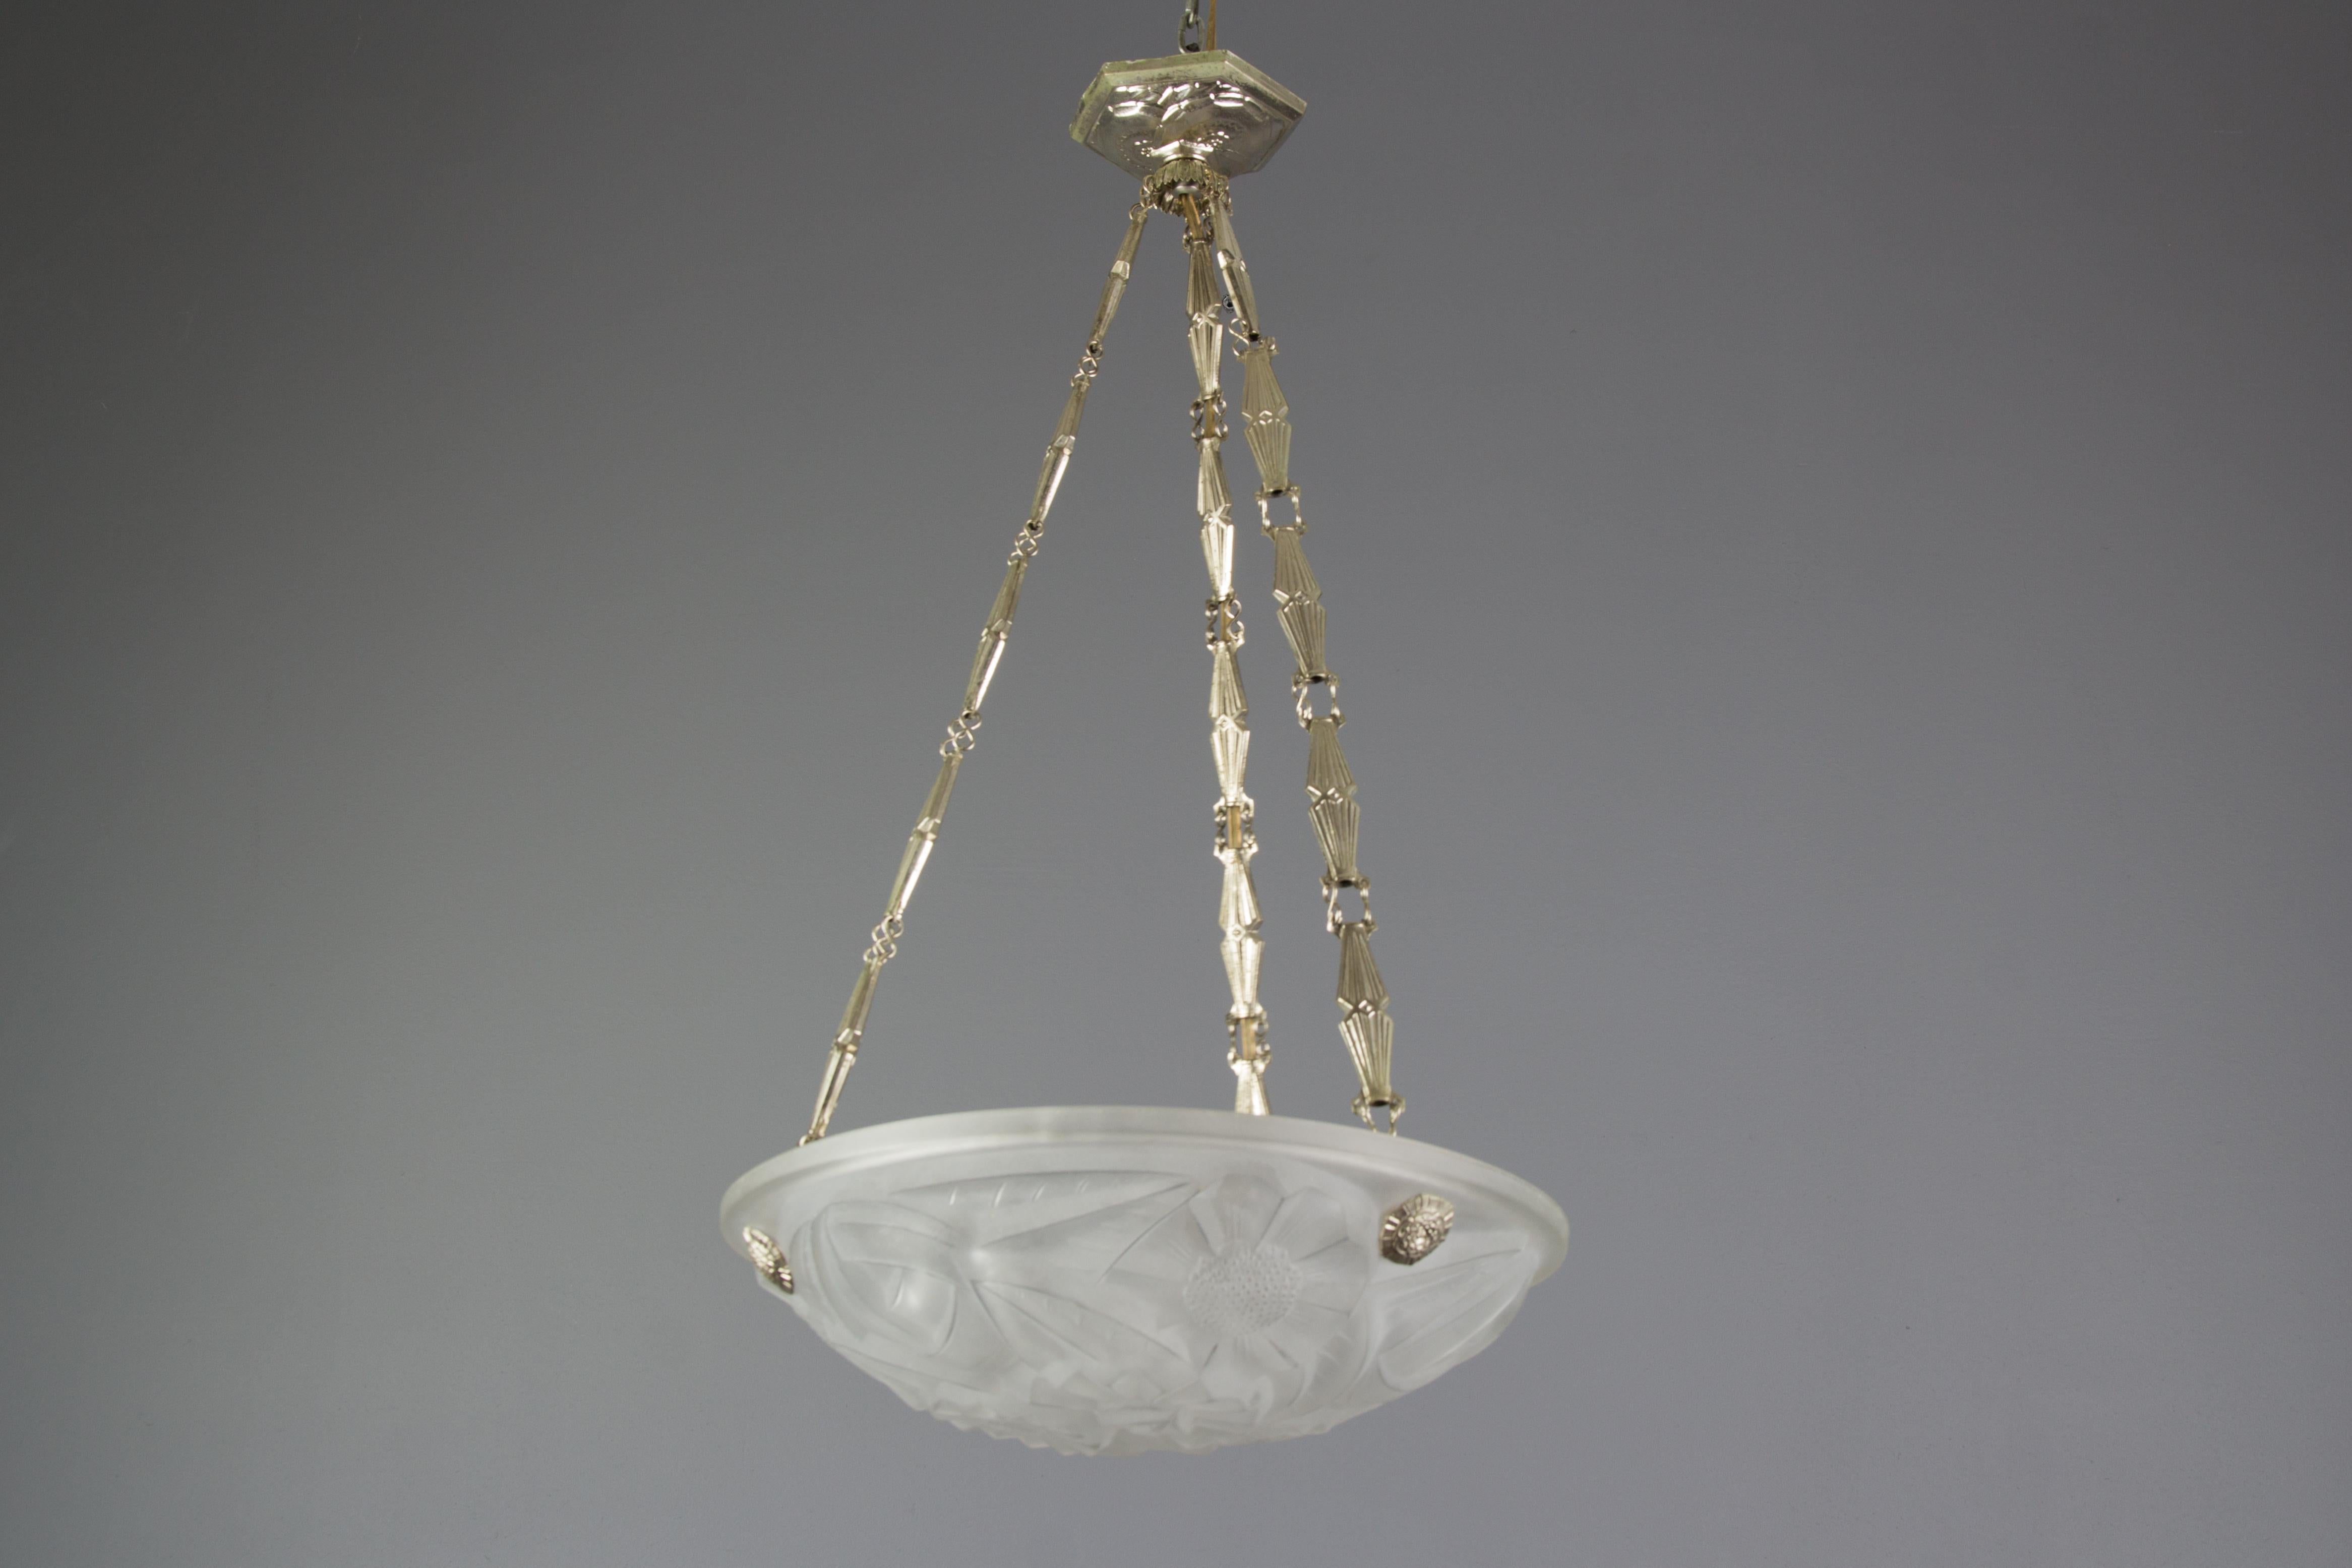 French Art Deco pendant chandelier with frosted pressed glass shade by Degue. Beautifully shaped glass shade features stylized flower decoration, glass surface signed 